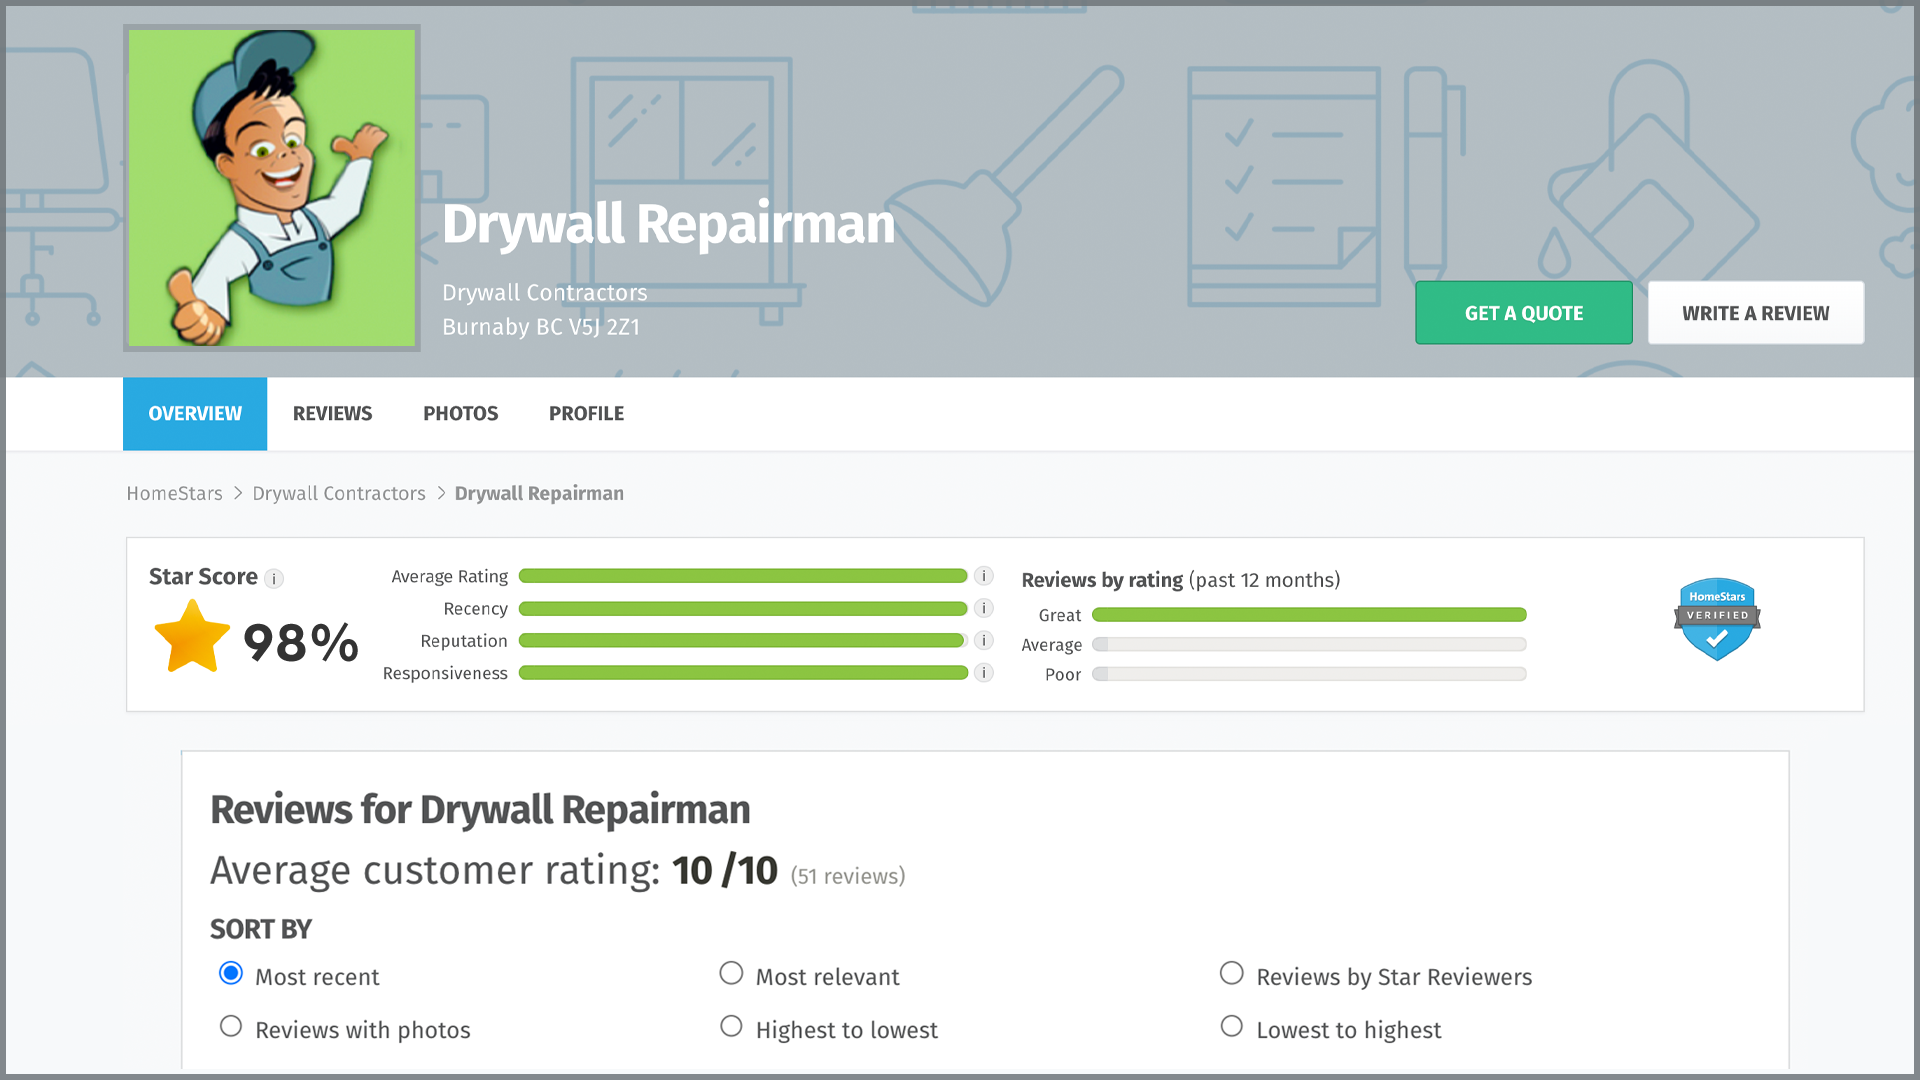 homestars-review-10-out-of-10-drywall-repairman-vancouver-bc-canada-1